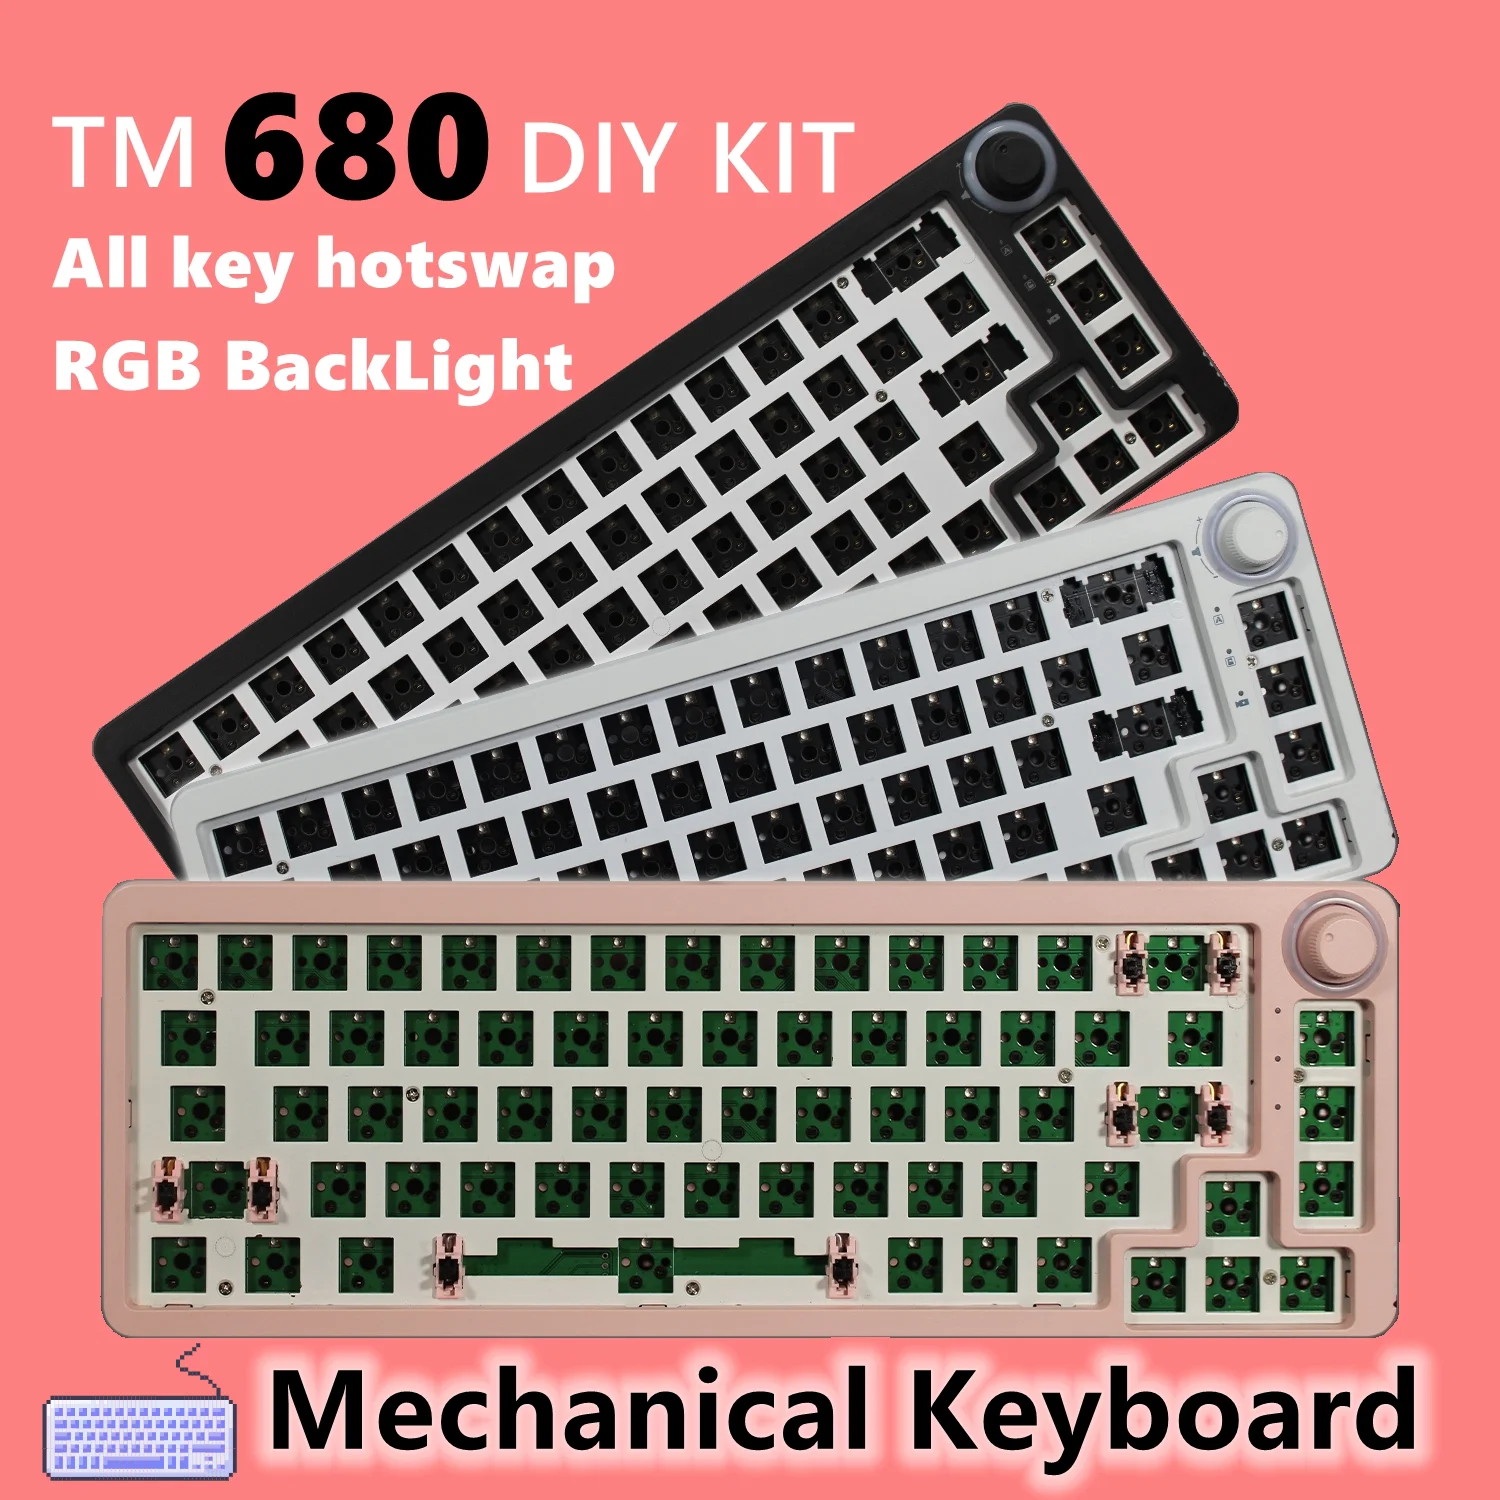 Permalink to TM680 Hot Swap 3 Mode Mechanical Keyboard DIY Kit Wired RGB Light Compatiable with 3/5 Pins for Cherry MX Gateron Kailh Switches